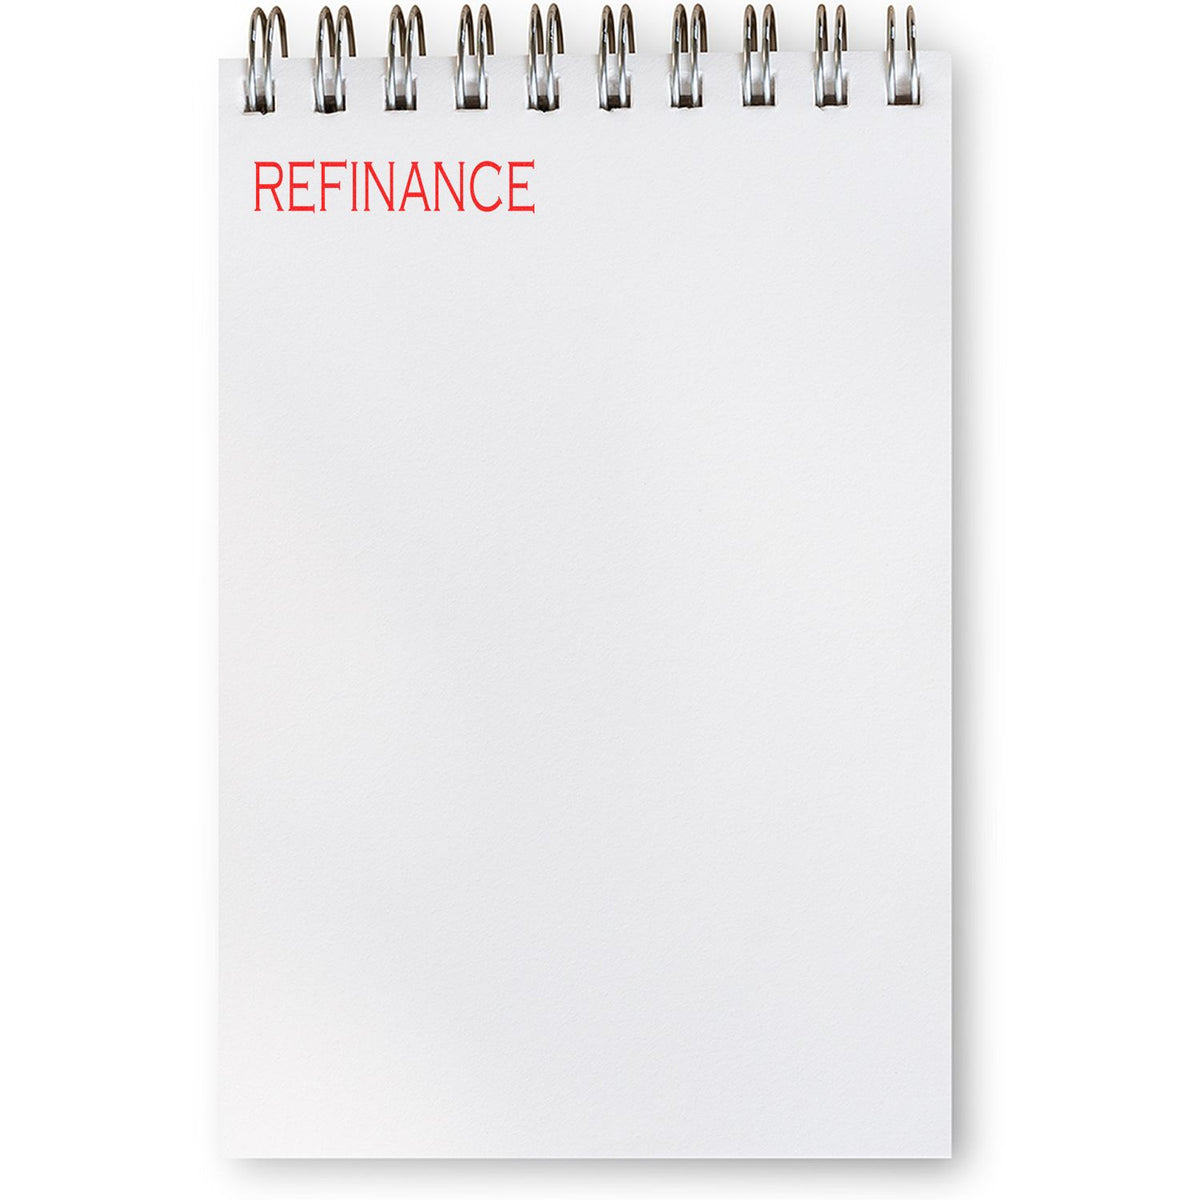 Refinance Rubber Stamp In Use Photo